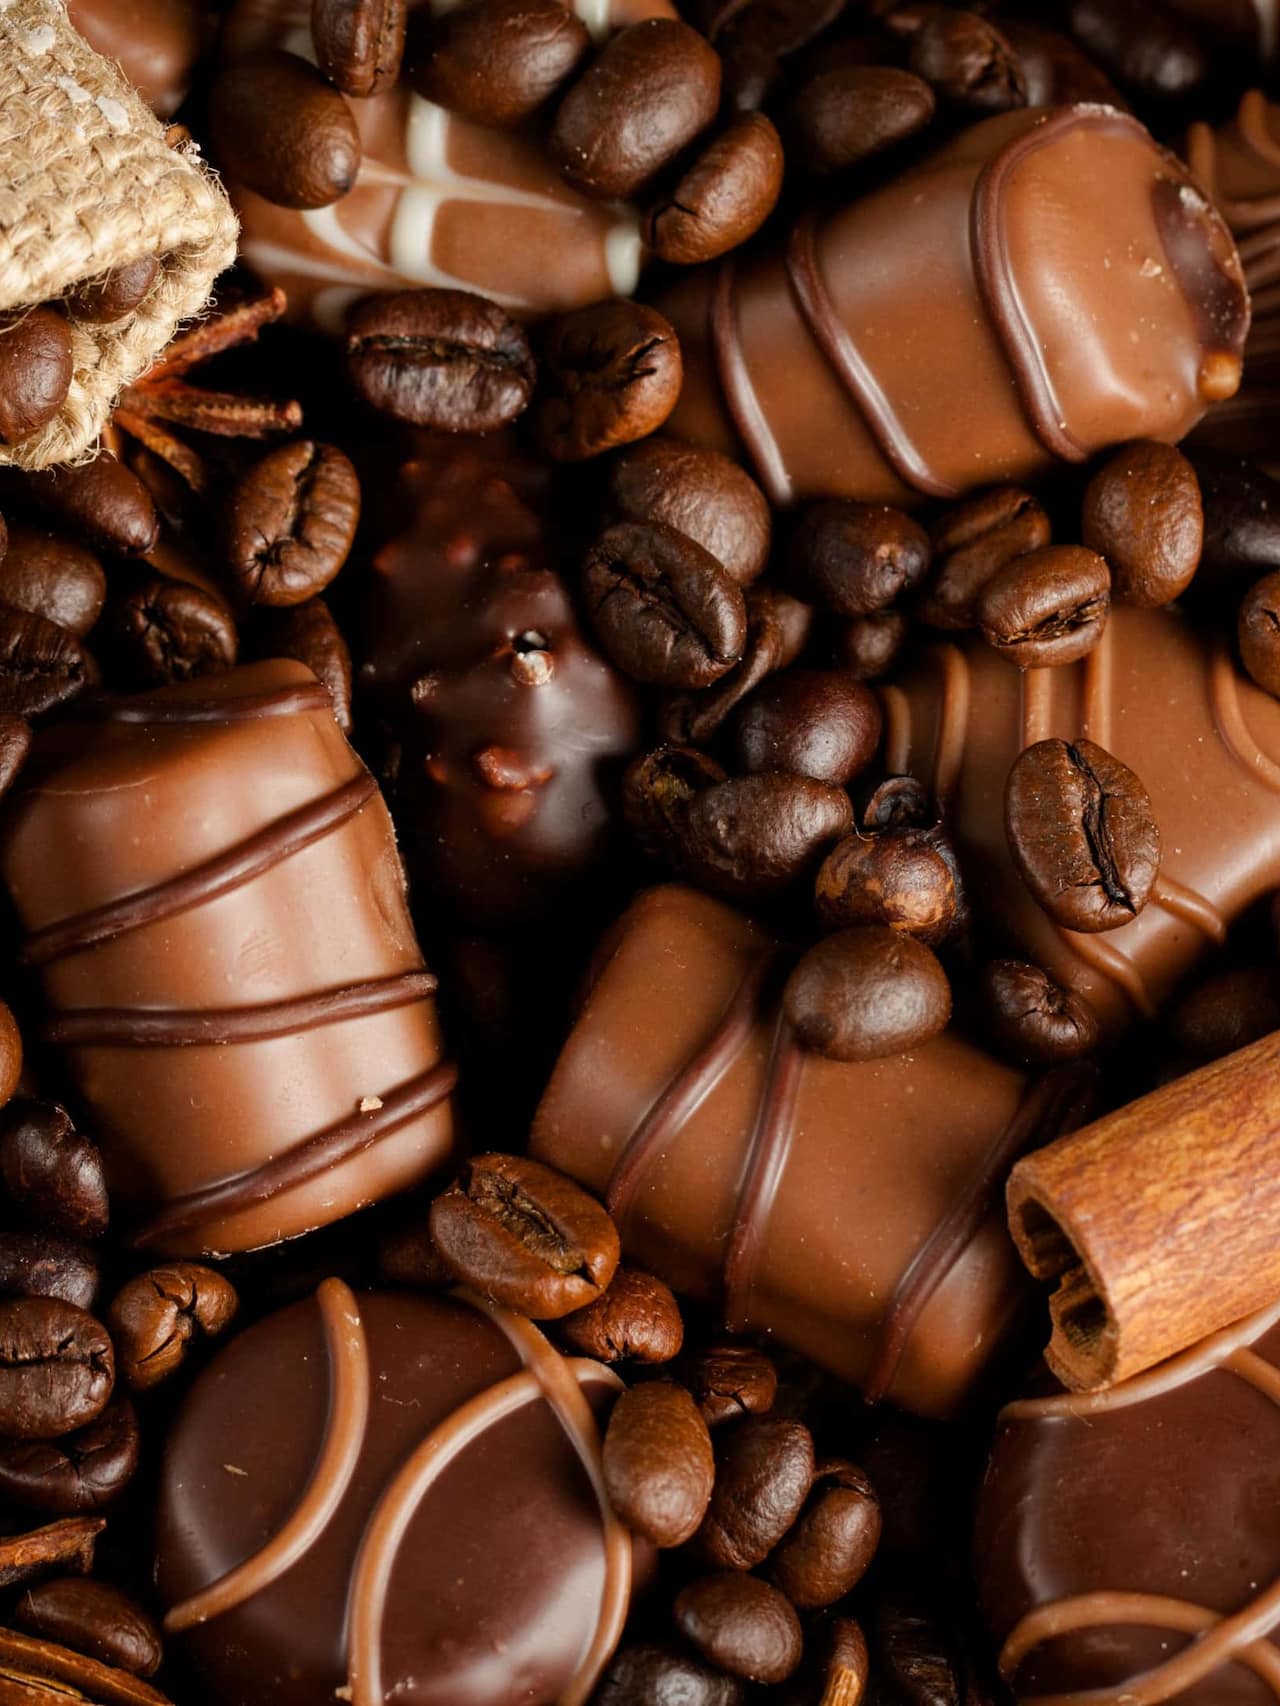 Does Chocolate Contain Caffeine?